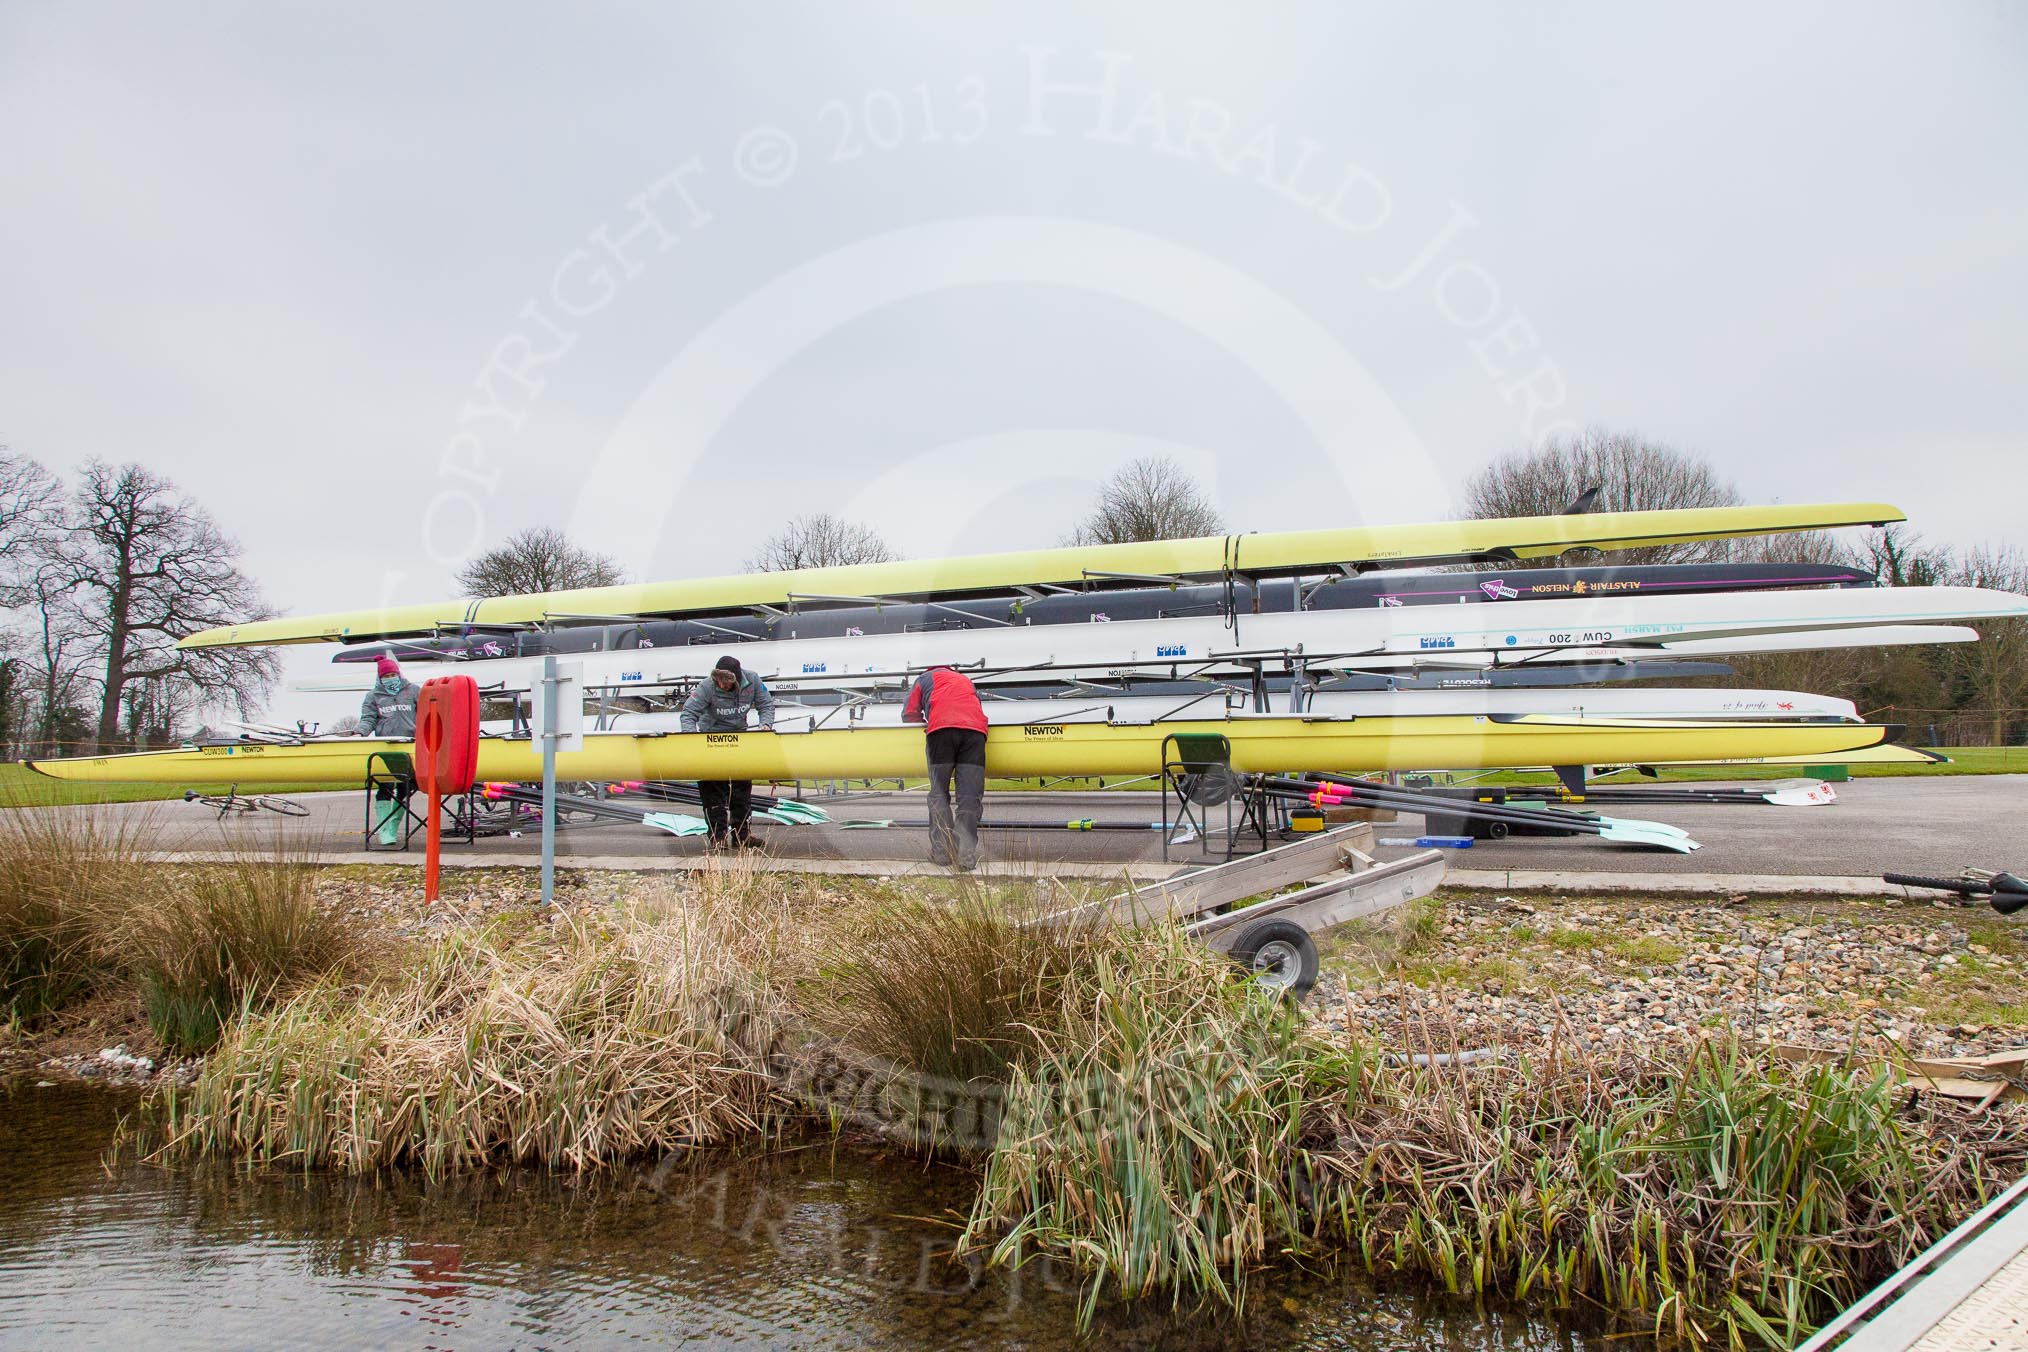 Preparations for the Henley Boat Races - the Cambridge boats at Eton Dorney.